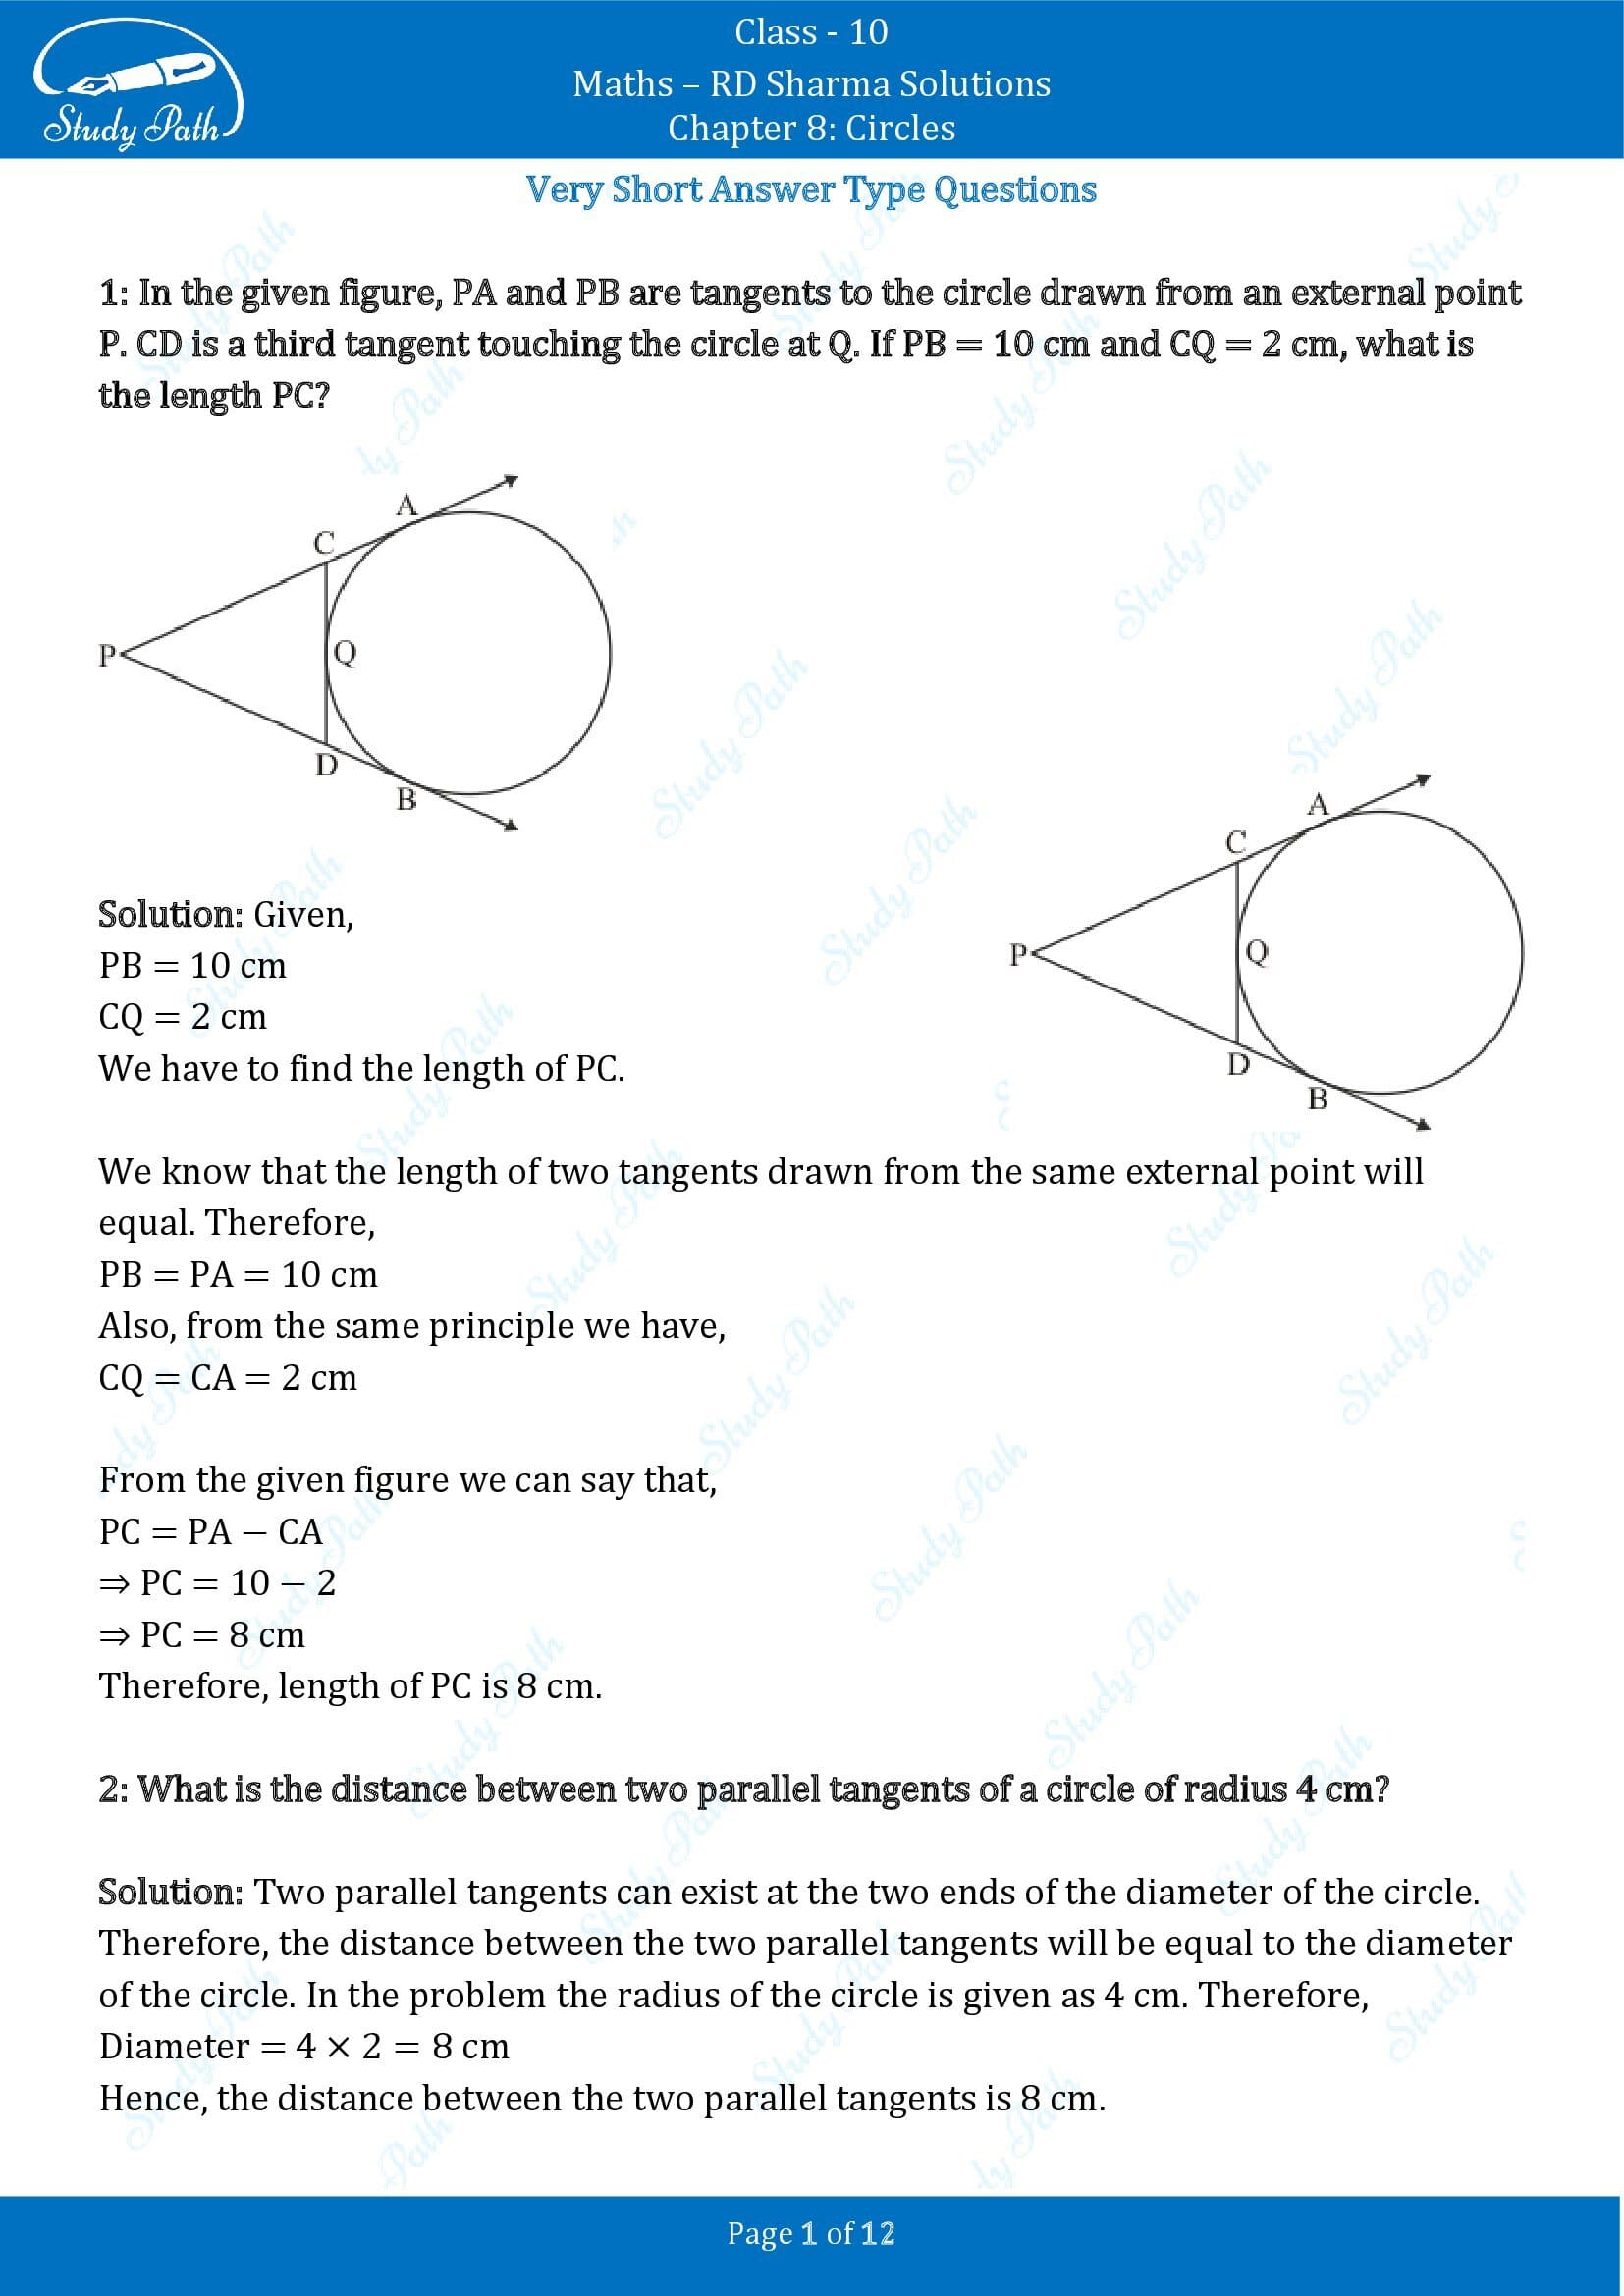 RD Sharma Solutions Class 10 Chapter 8 Circles Very Short Answer Type Questions VSAQs 00001